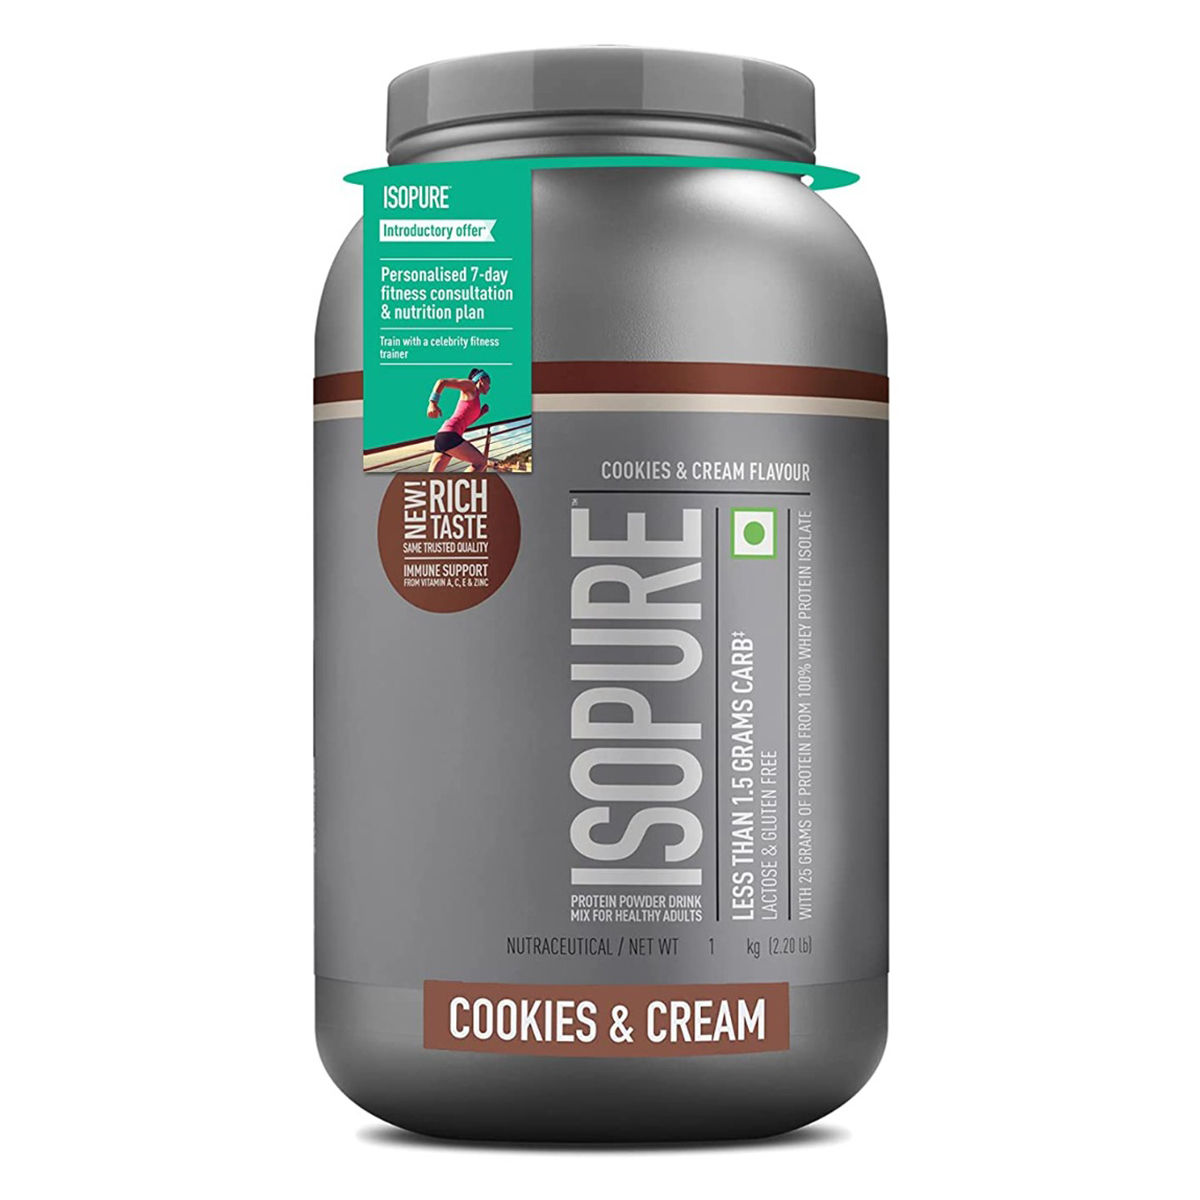 Buy Isopure Less Than 1.5 gm Carbs 100% Whey Protein Isolate Cookies & Cream Flavour Powder, 2.20 lb Online